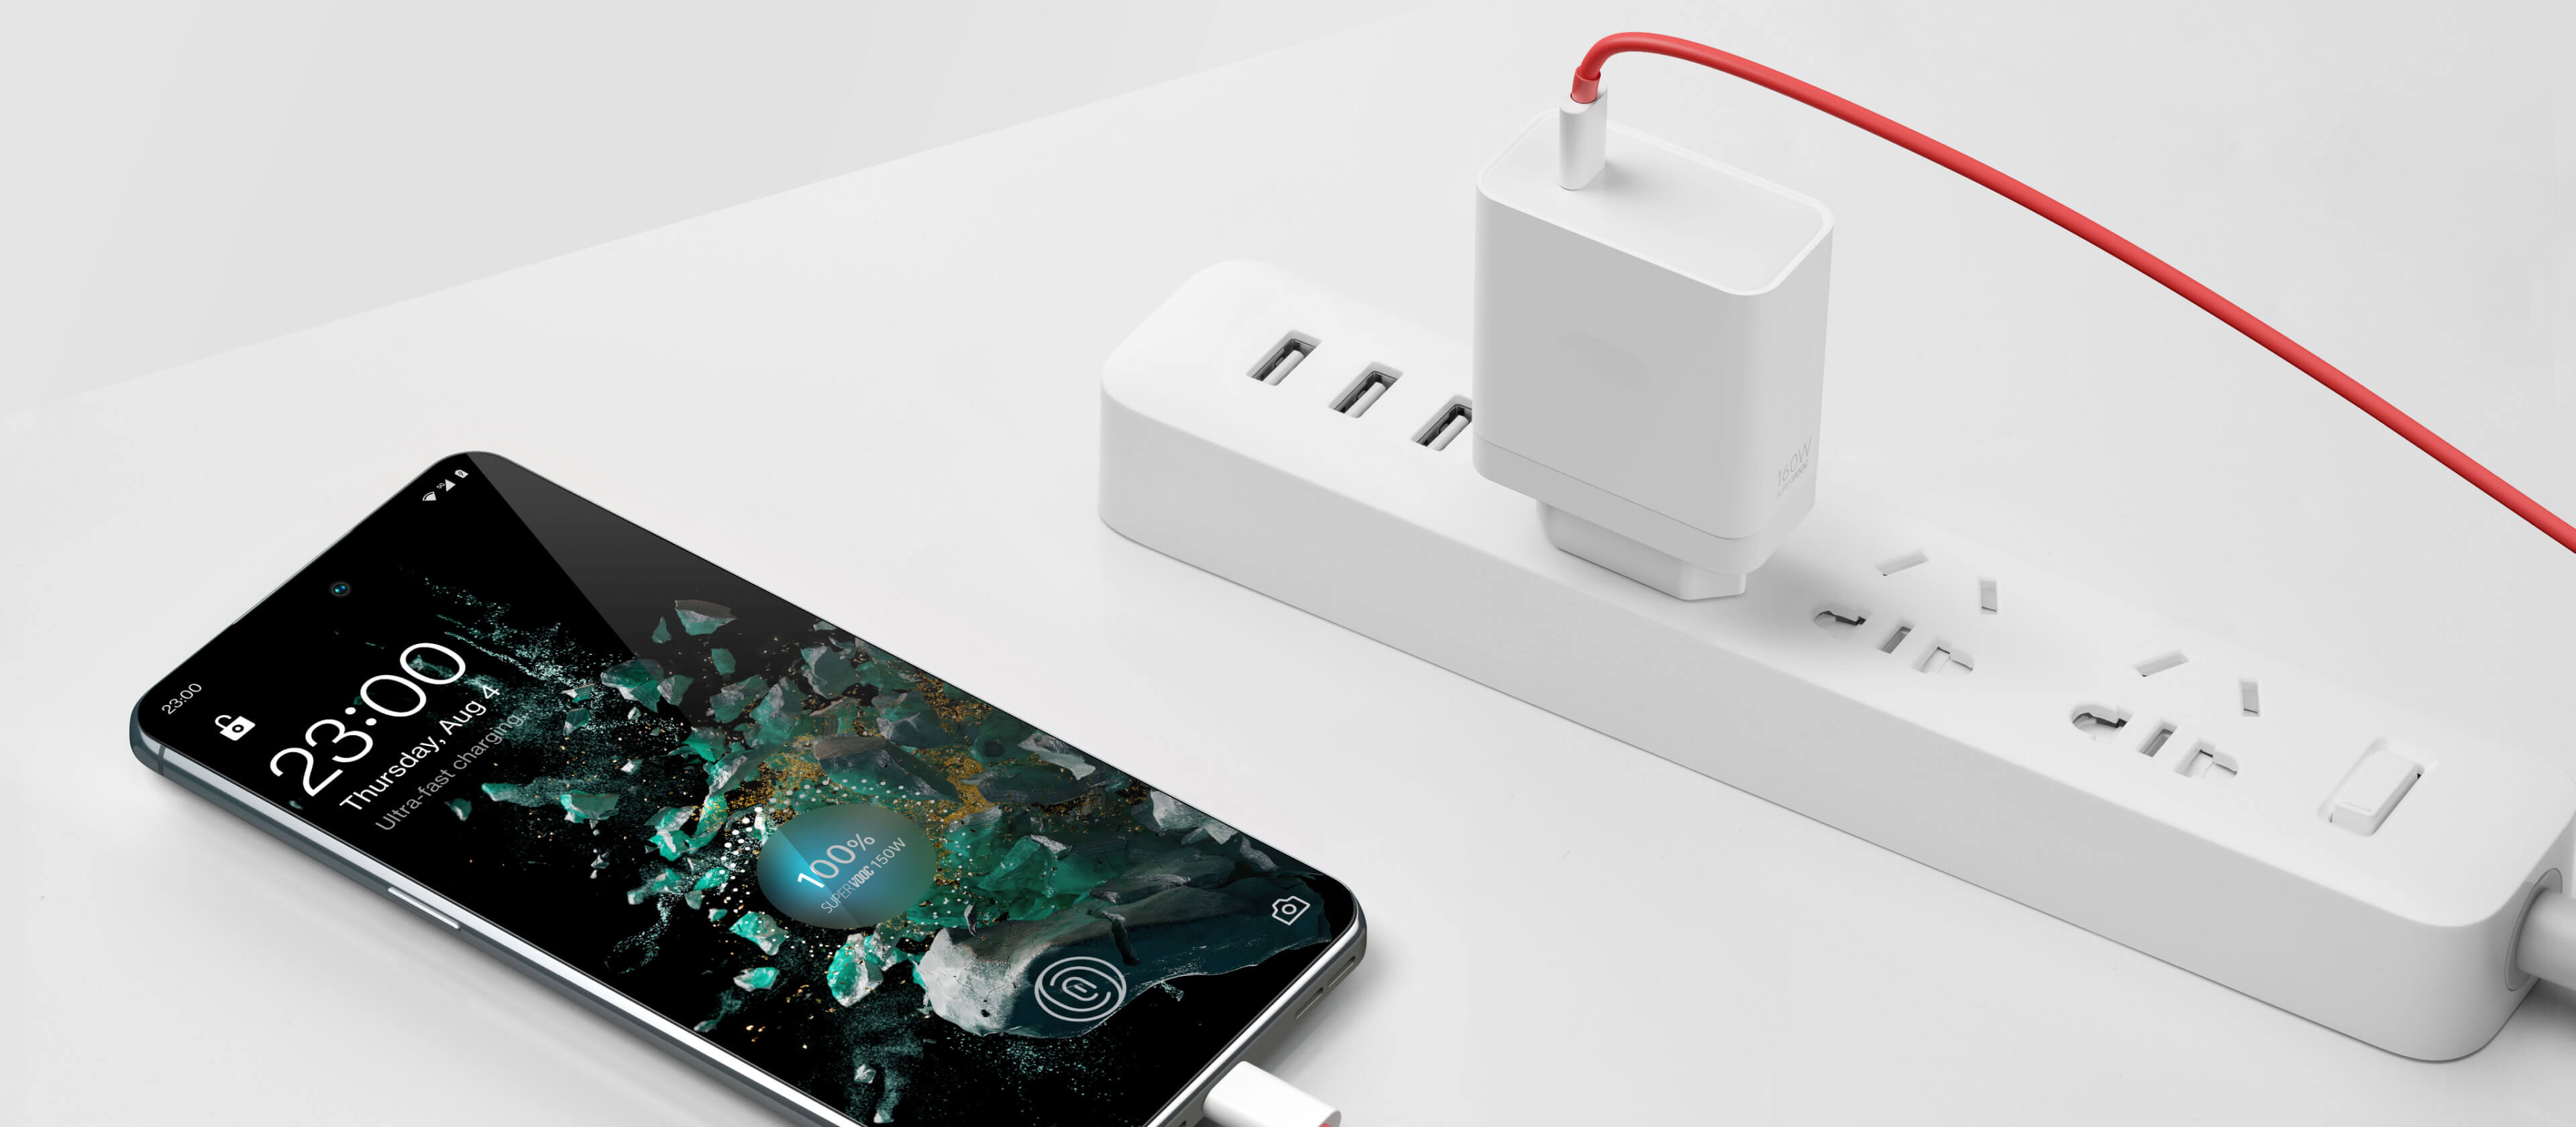 OnePlus SUPERVOOC 160W Adapter With Cable in Pakistan.